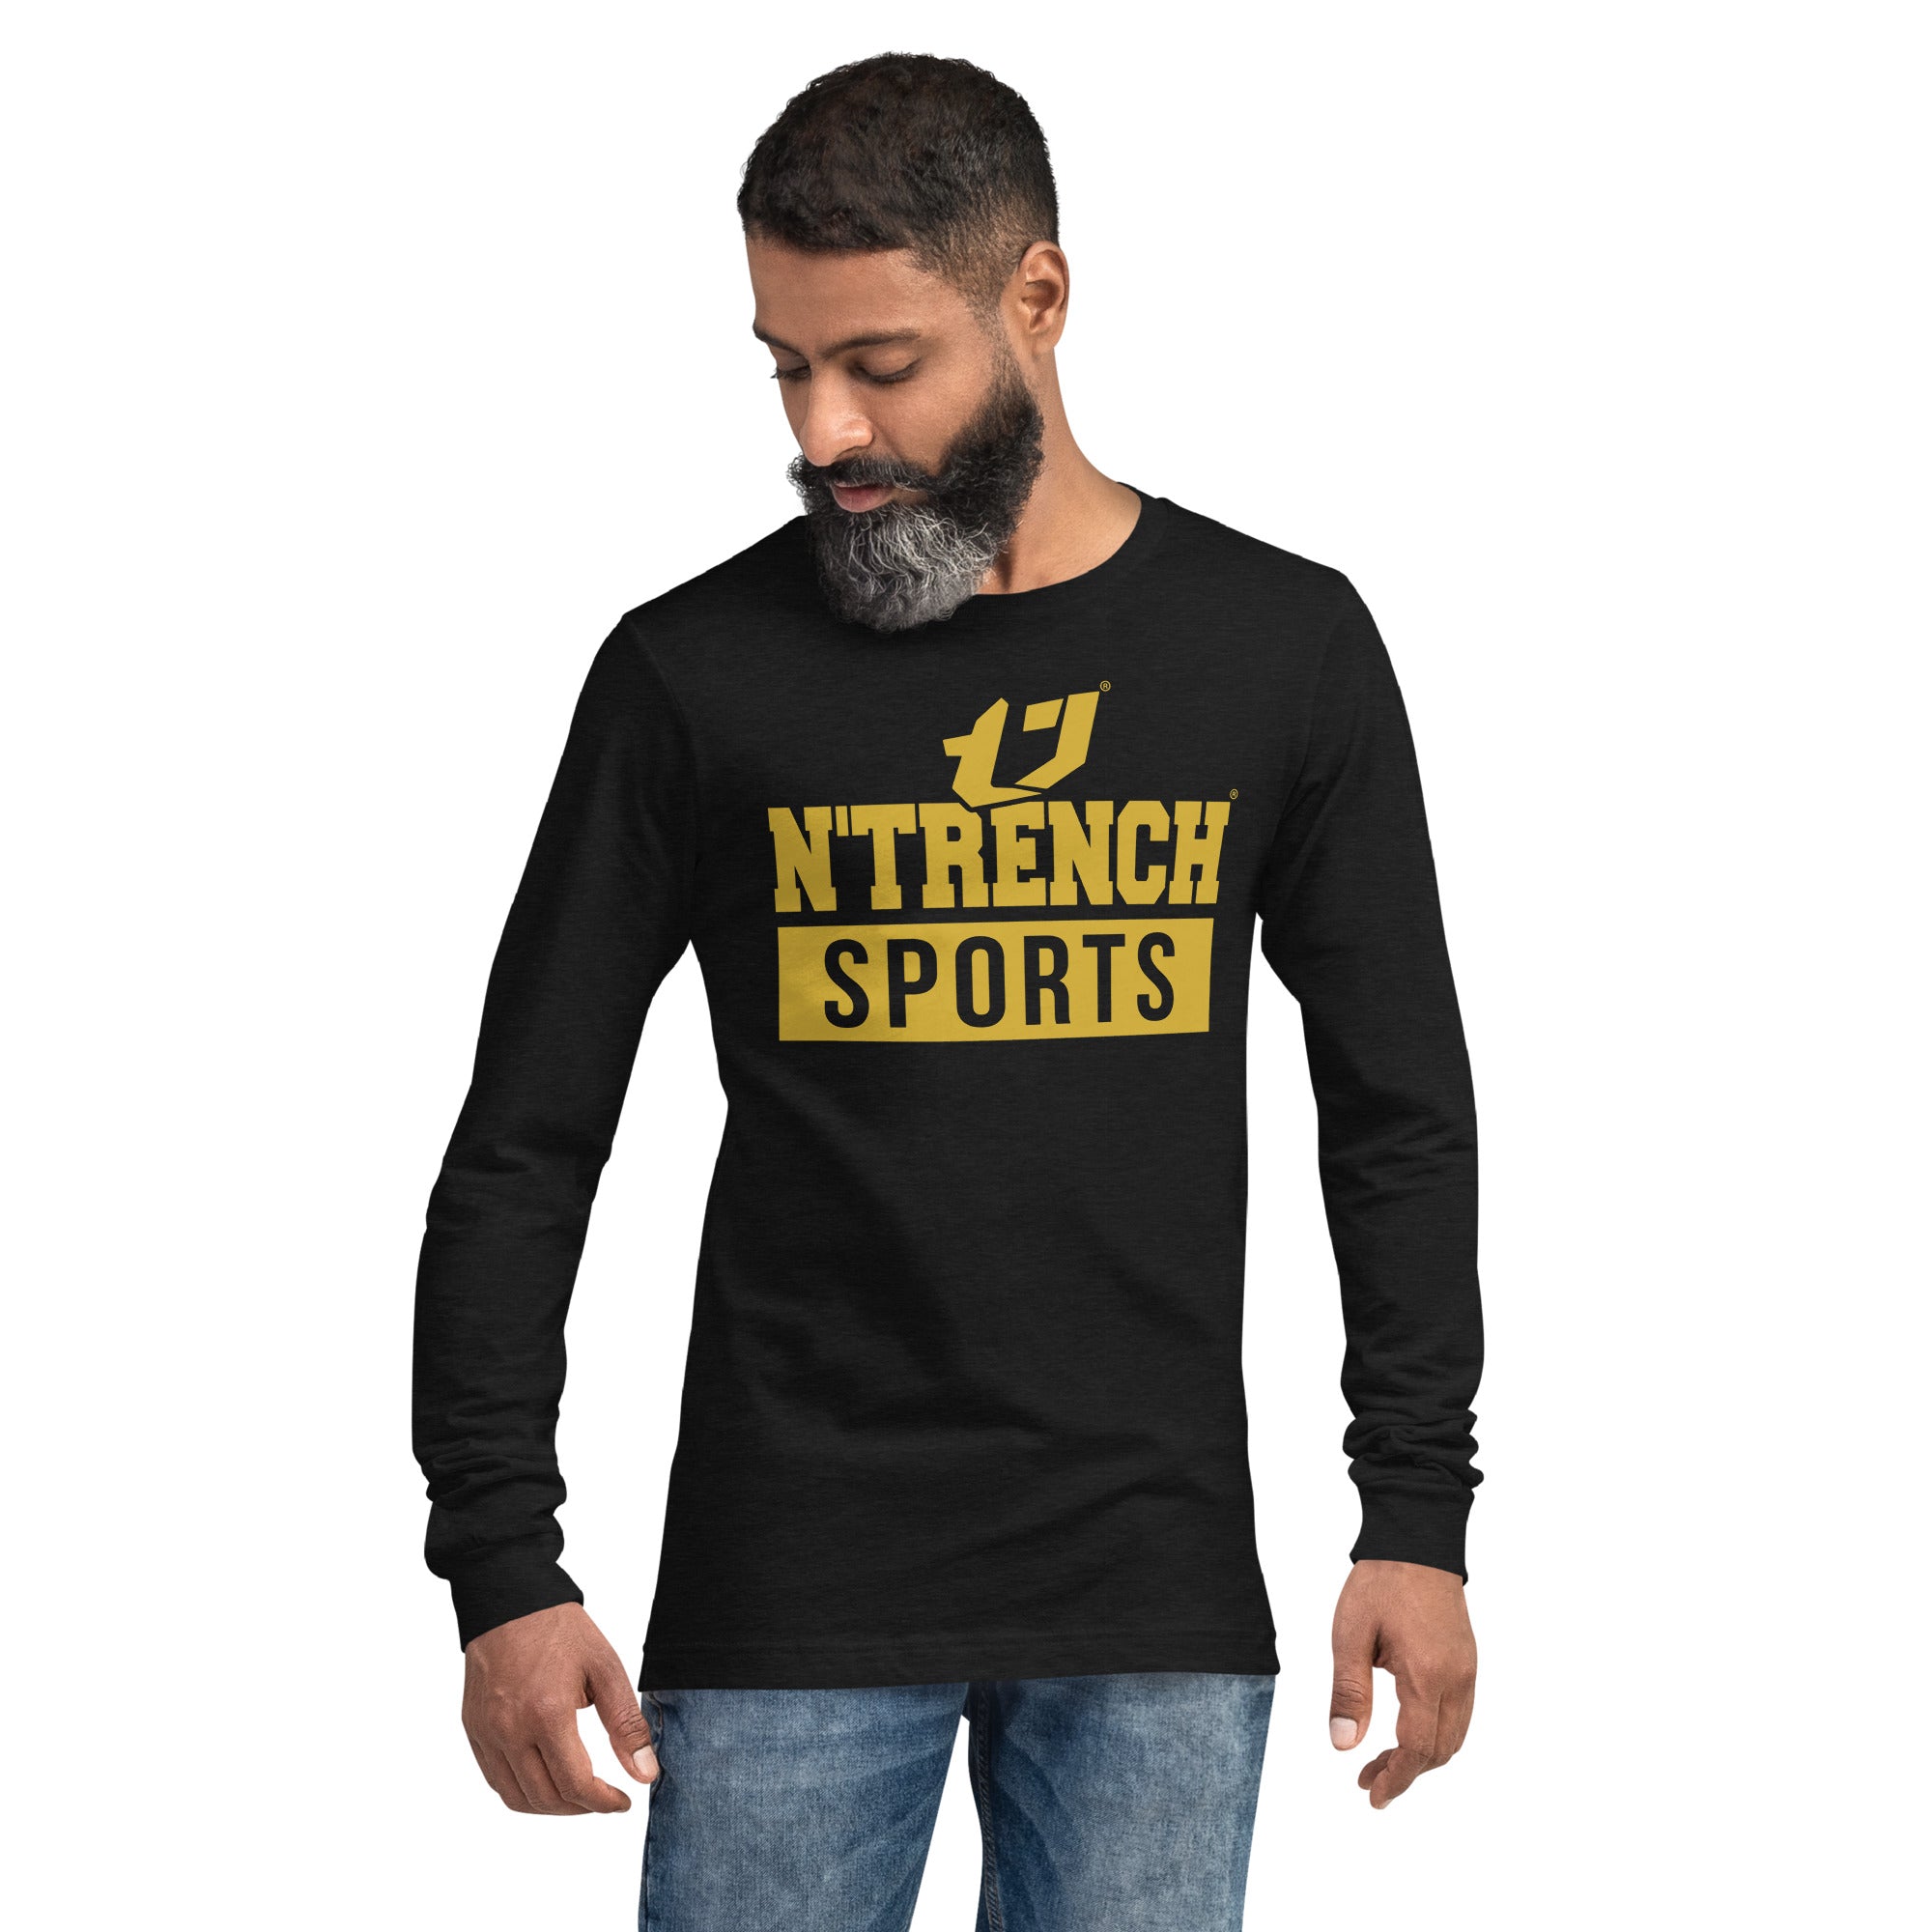 N'Trench Gold Logo and Lettering Unisex Long Sleeve Tee